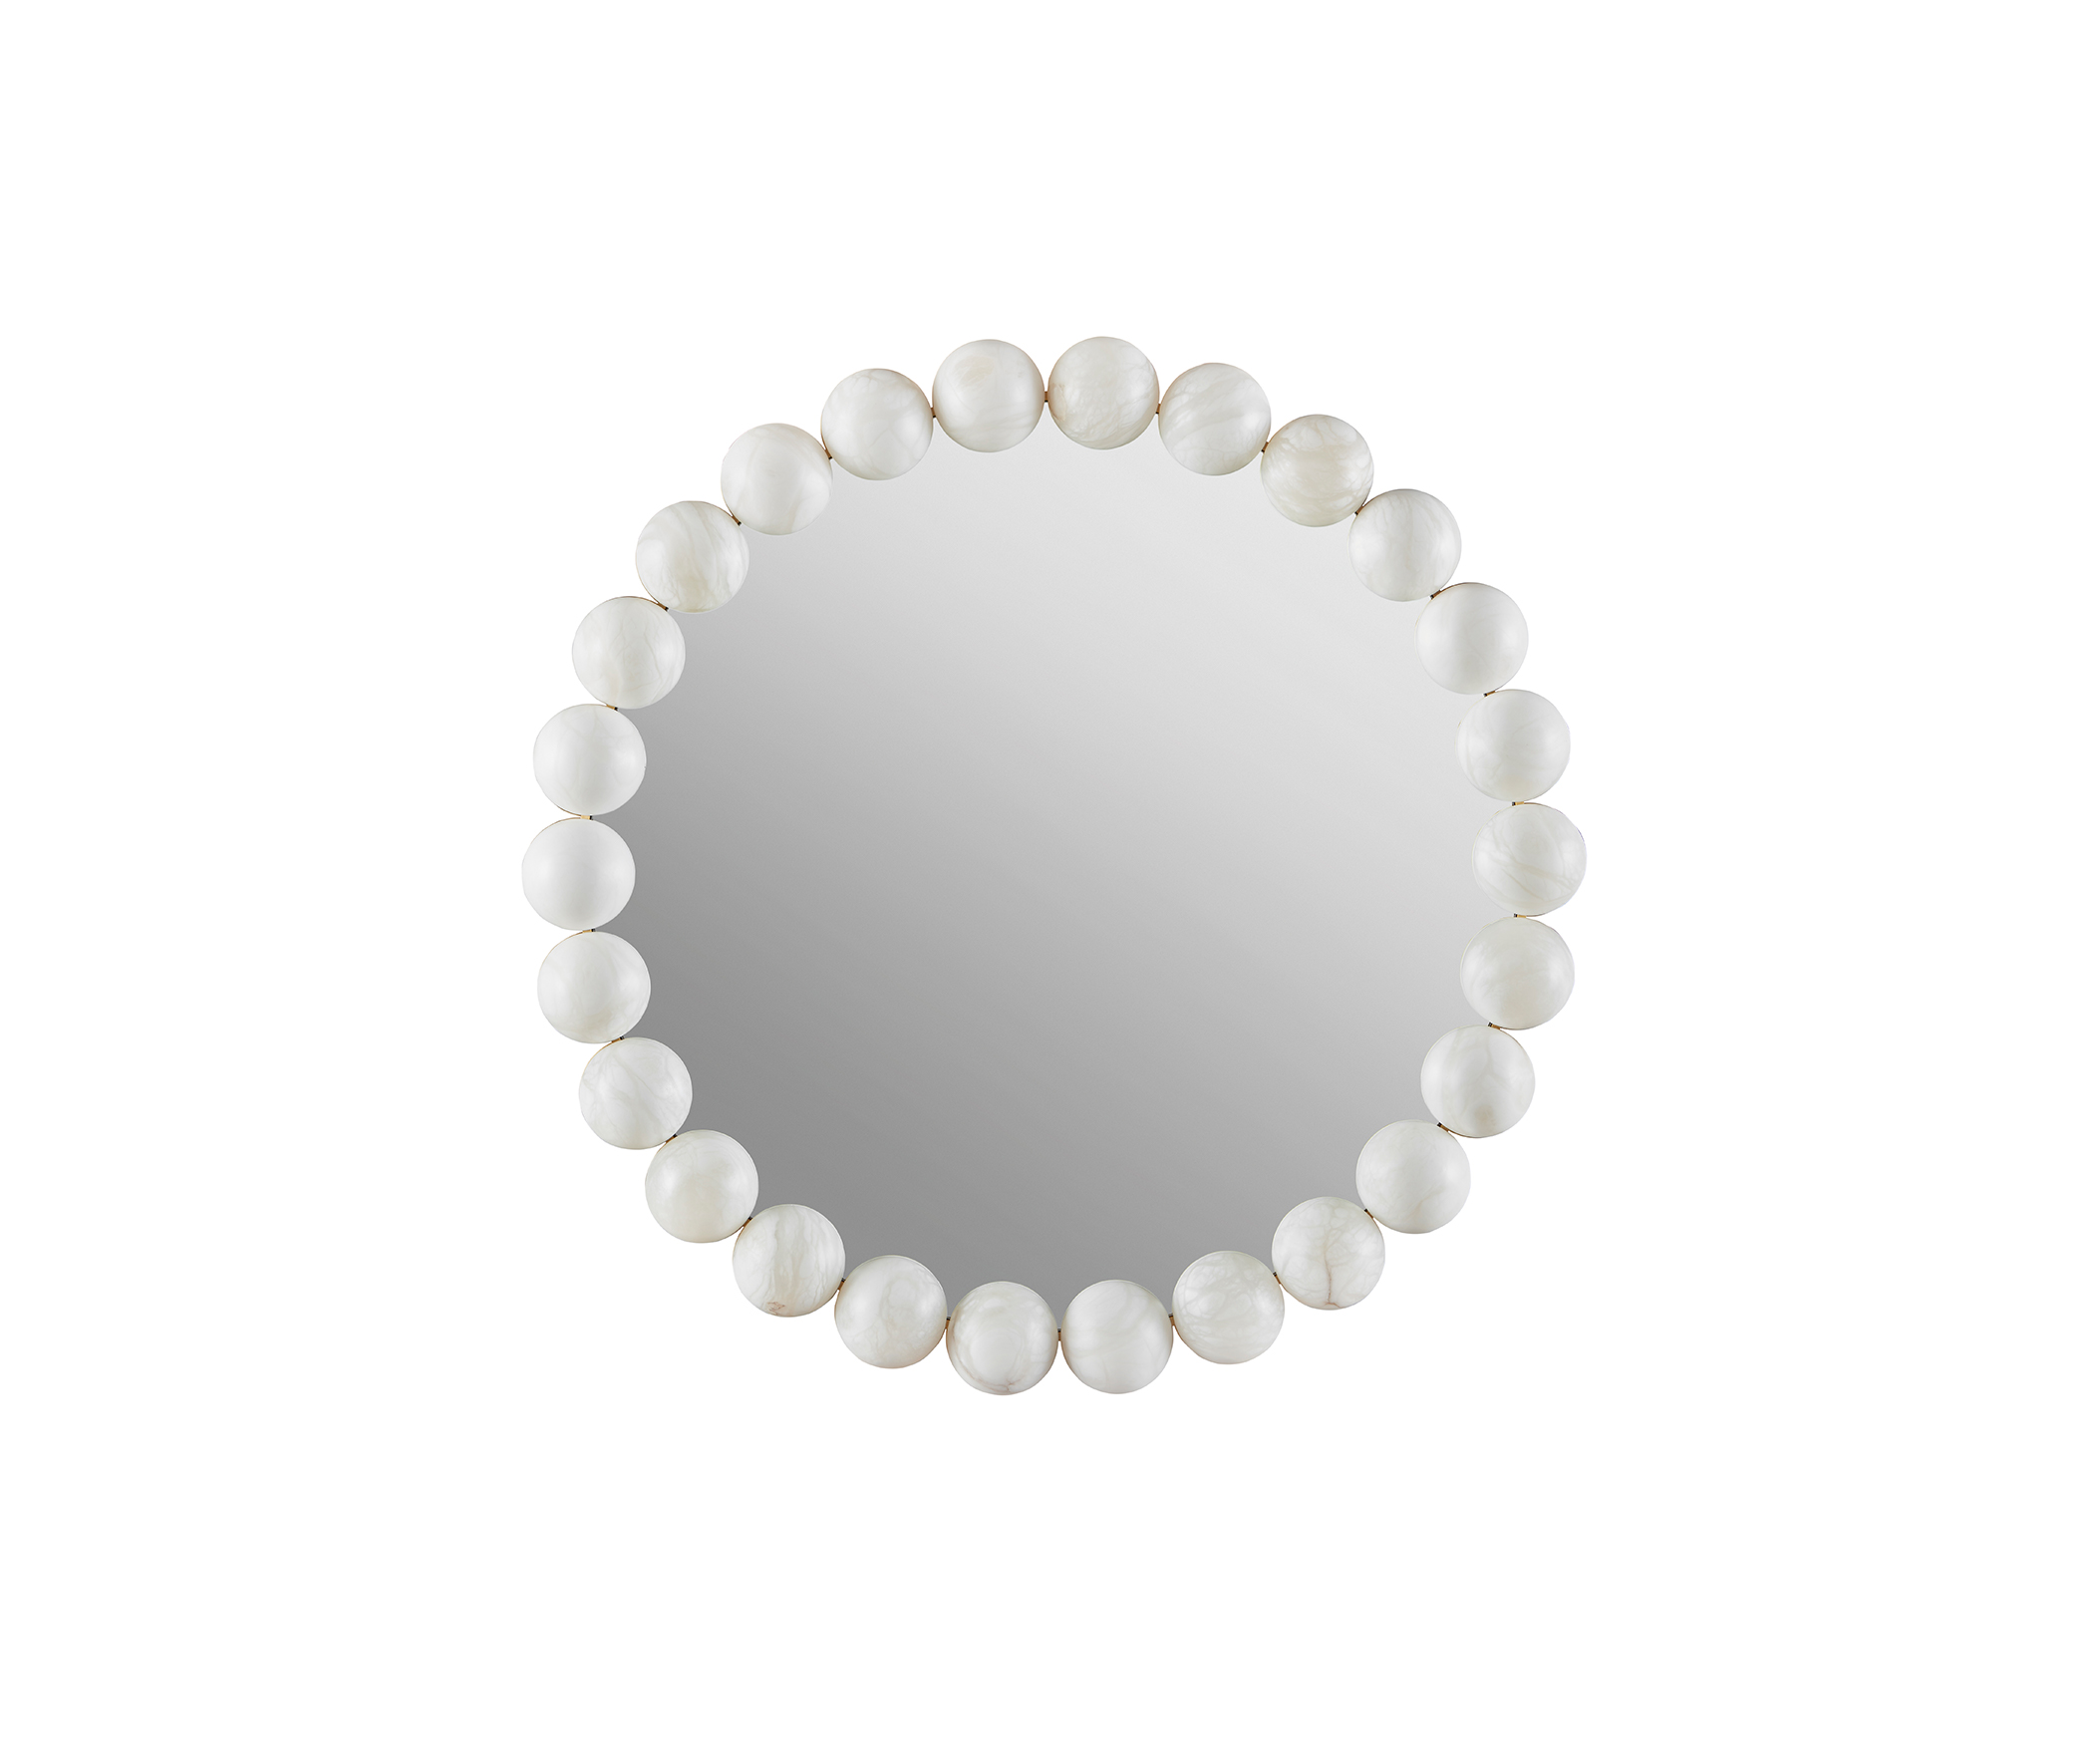 Baker_Pearl Mirror_int_products